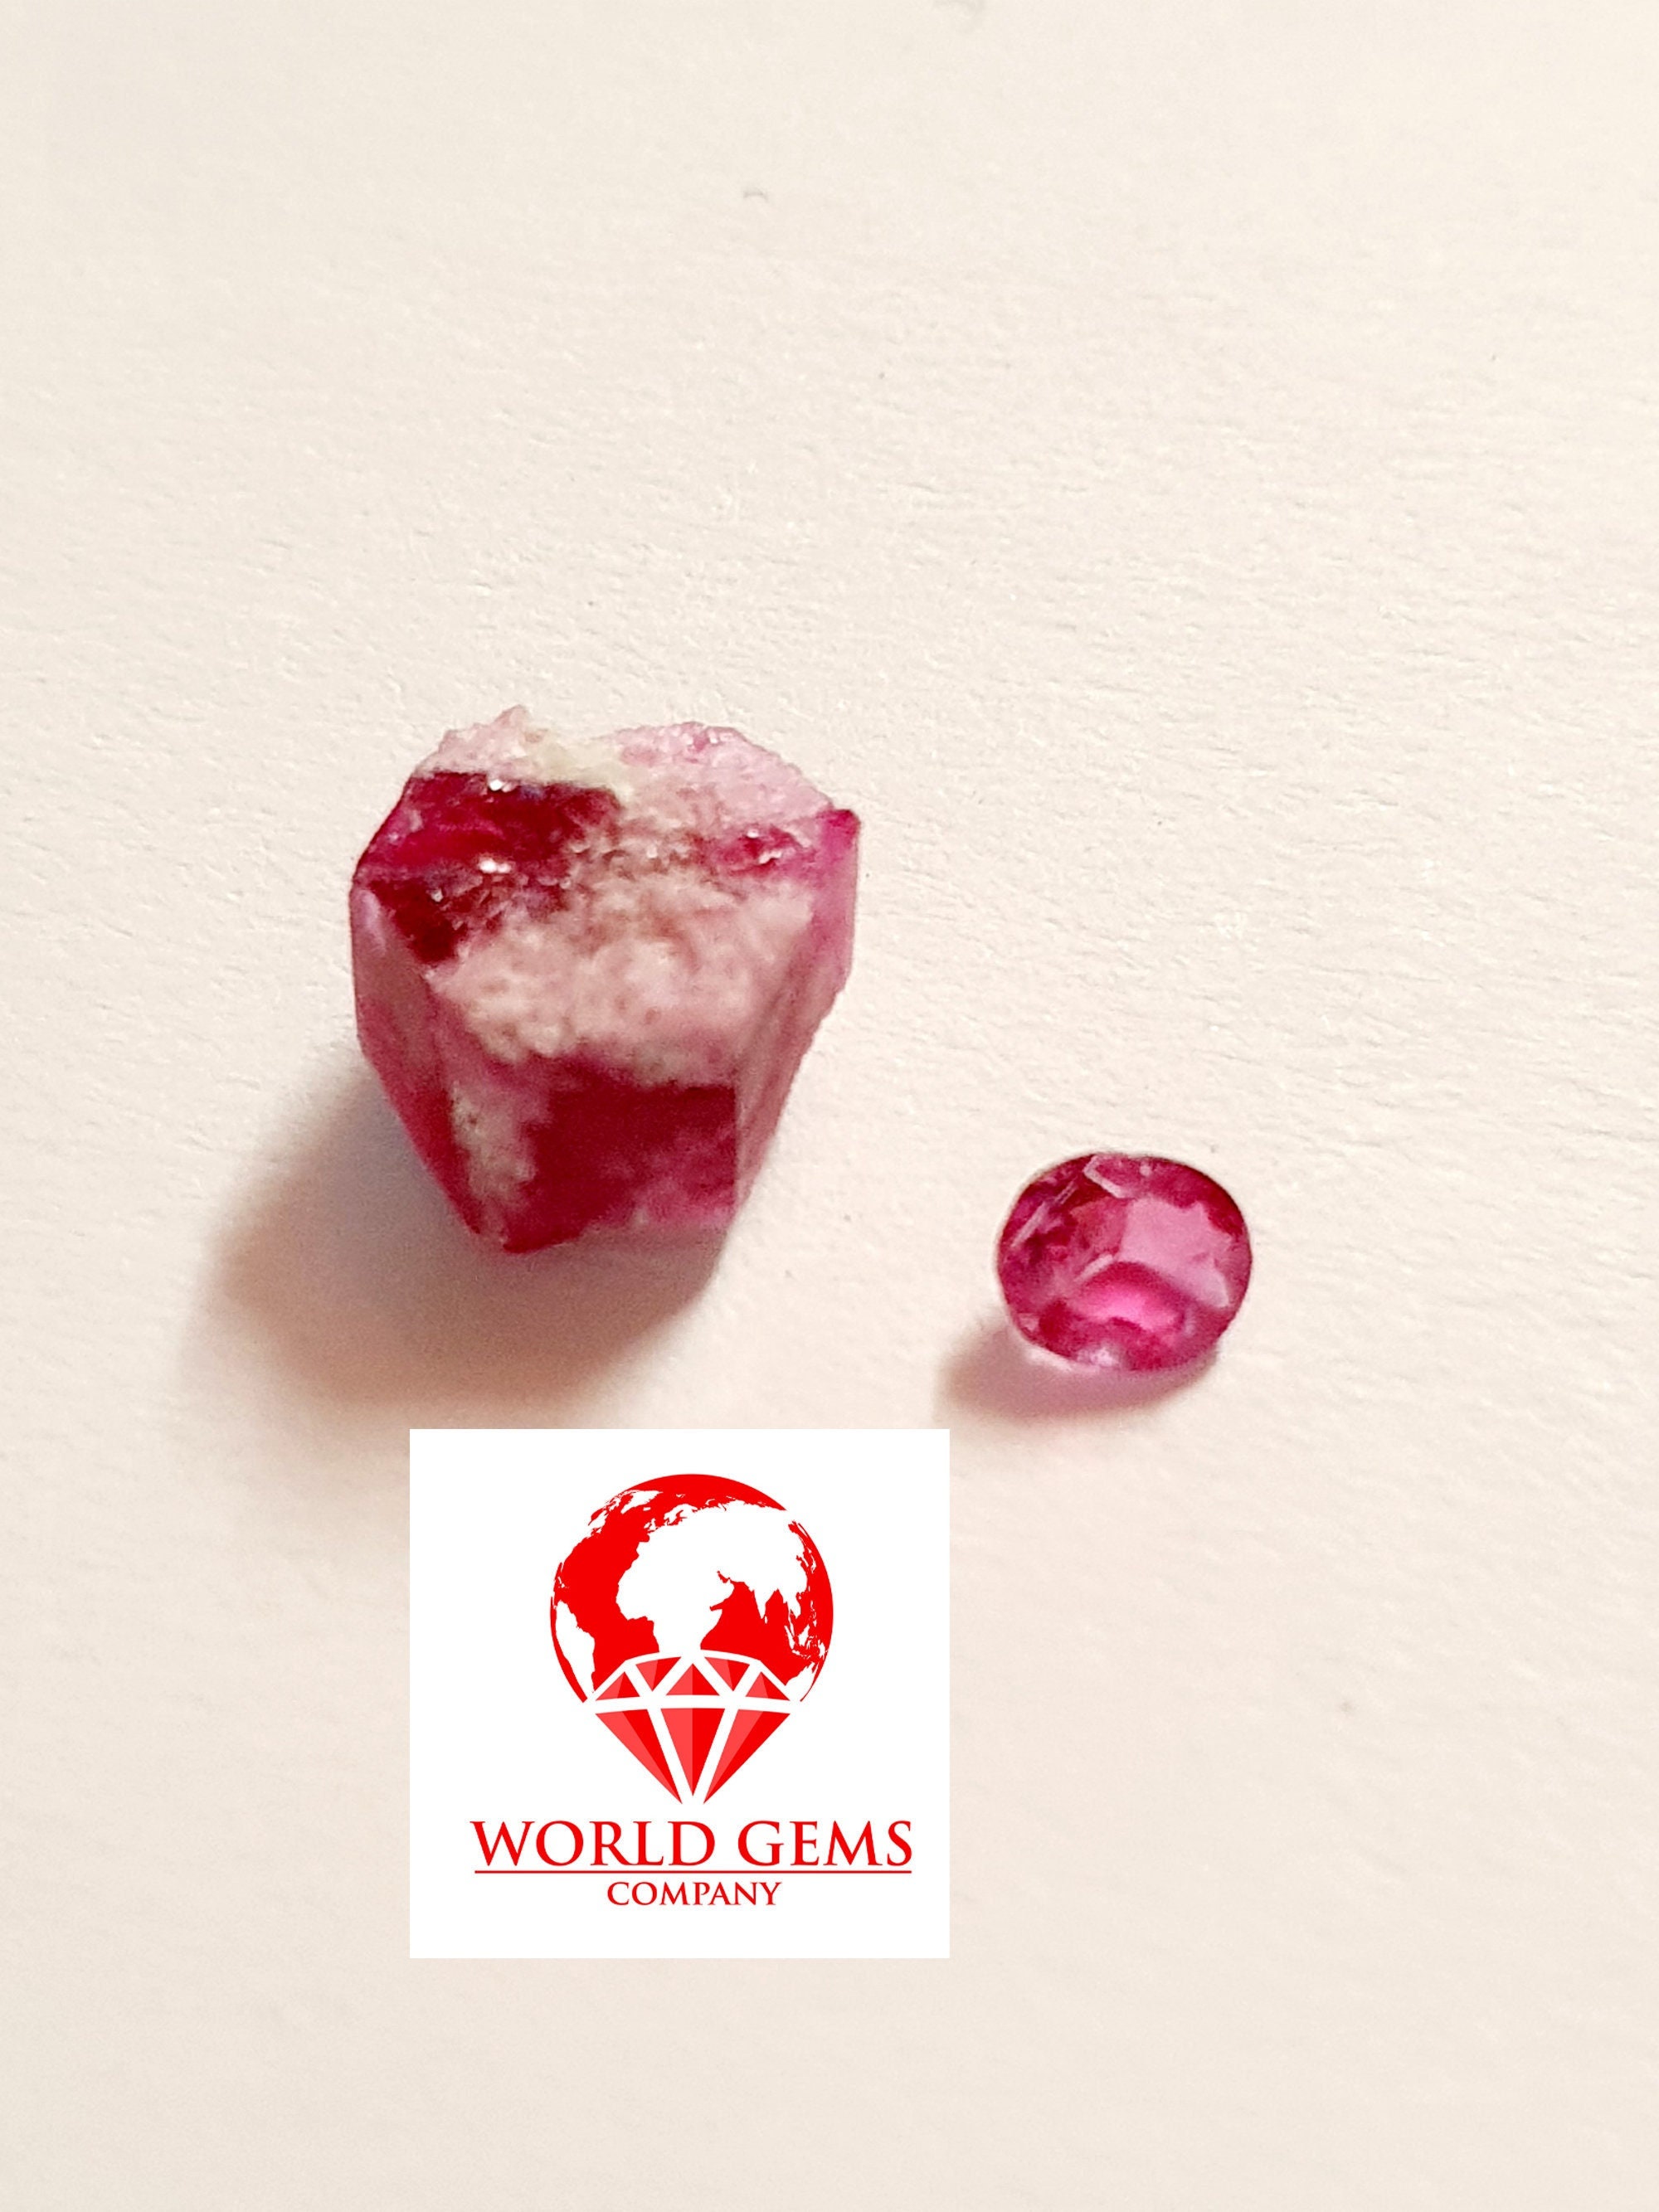 Fairy Stone Red, Raw Red Crystals, Rough Red Crystals in the Uk, Affordable  Red Stones, Rough Red Crystals, Red Fairystone, Raw Red Stone Uk 